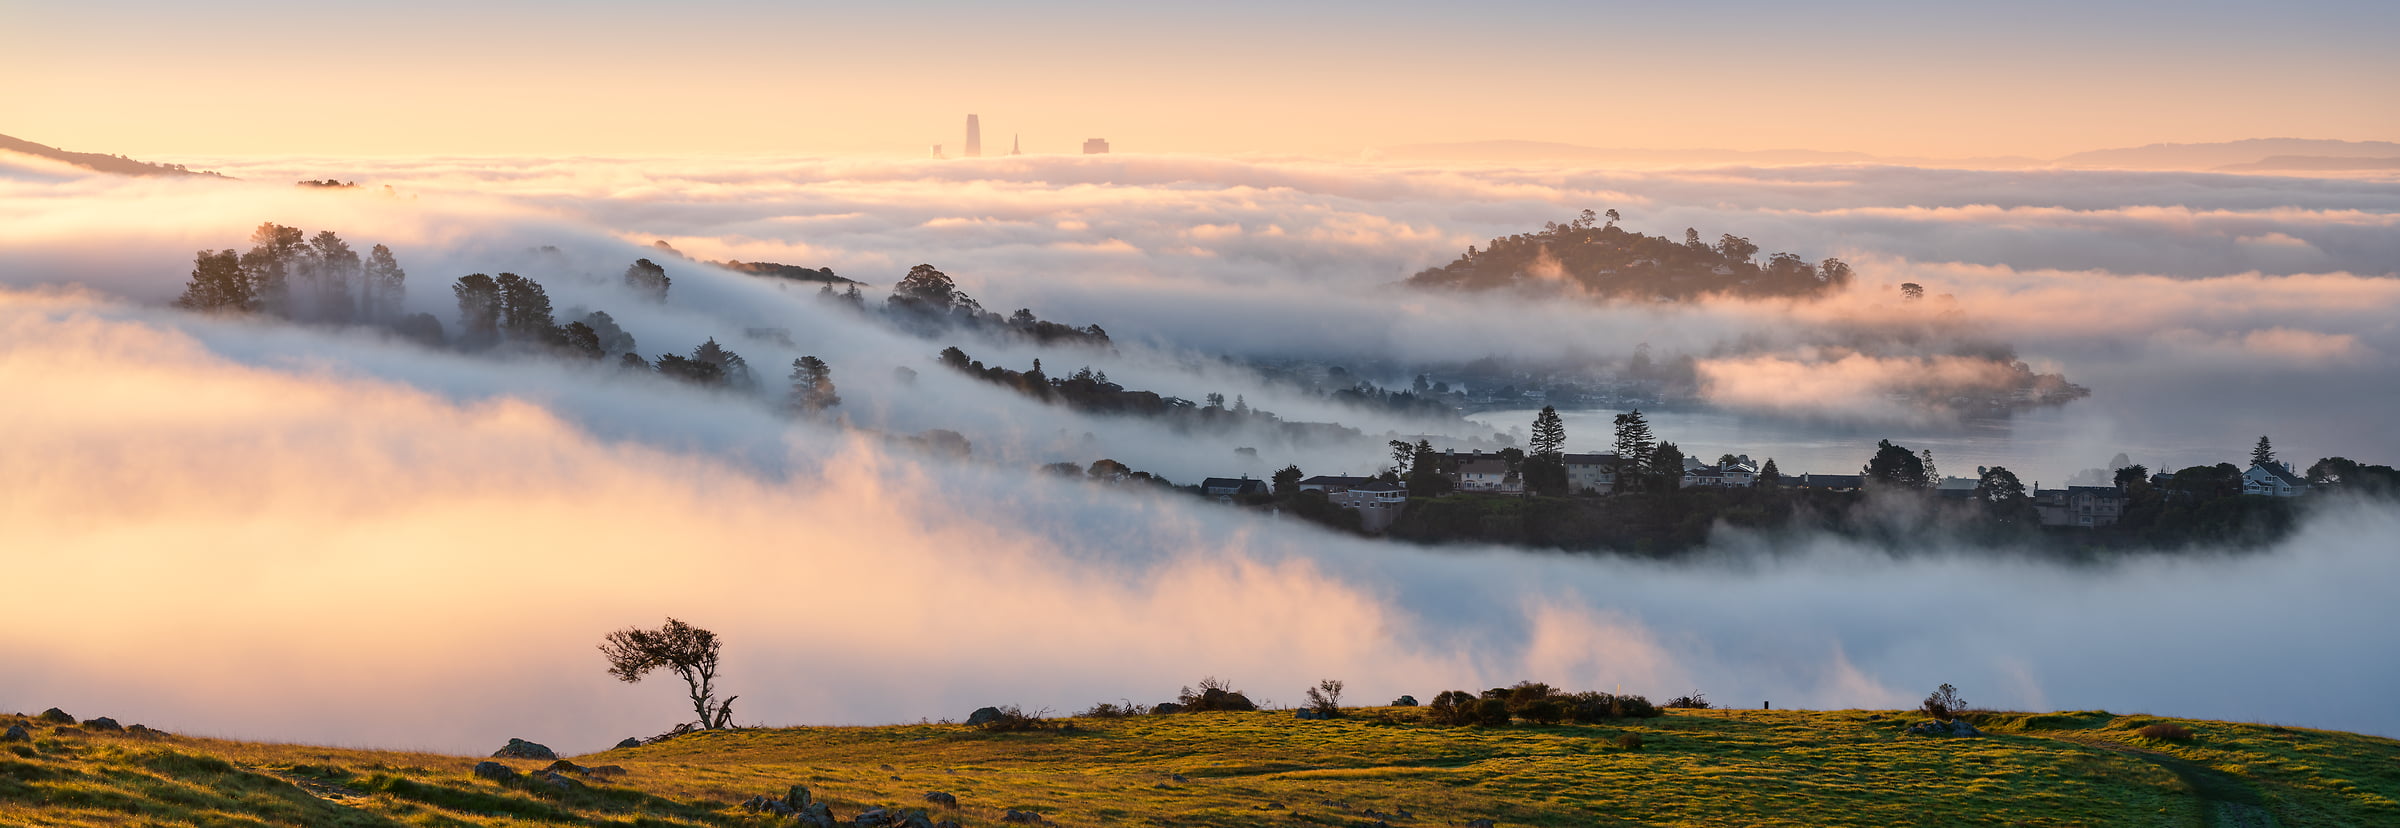 116 megapixels! A very high resolution, art decor photo print of a San Francisco landscape; photograph created by Jeff Lewis near San Francisco in Marin County, California